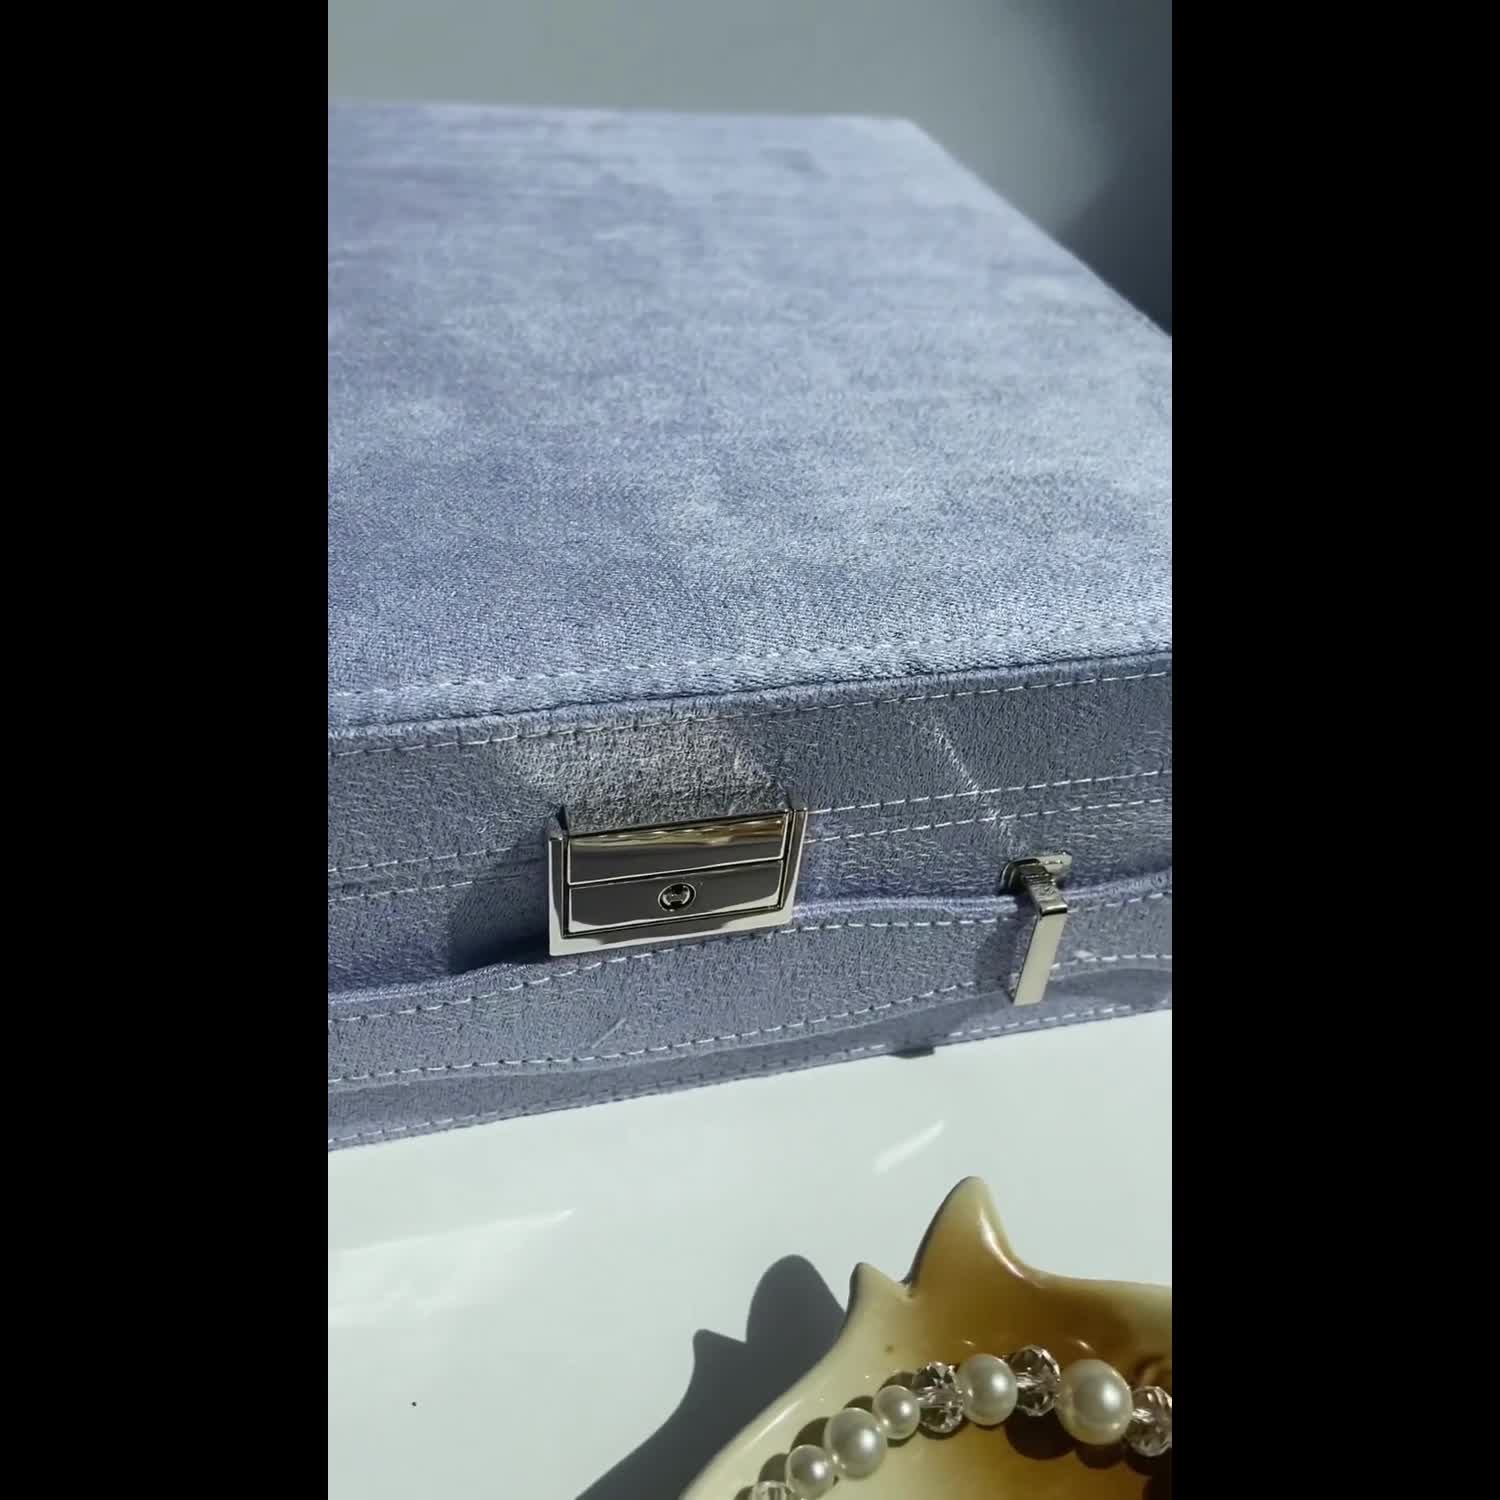 How to easily clean your Tarnish Louis Vuitton lock and key, DIY